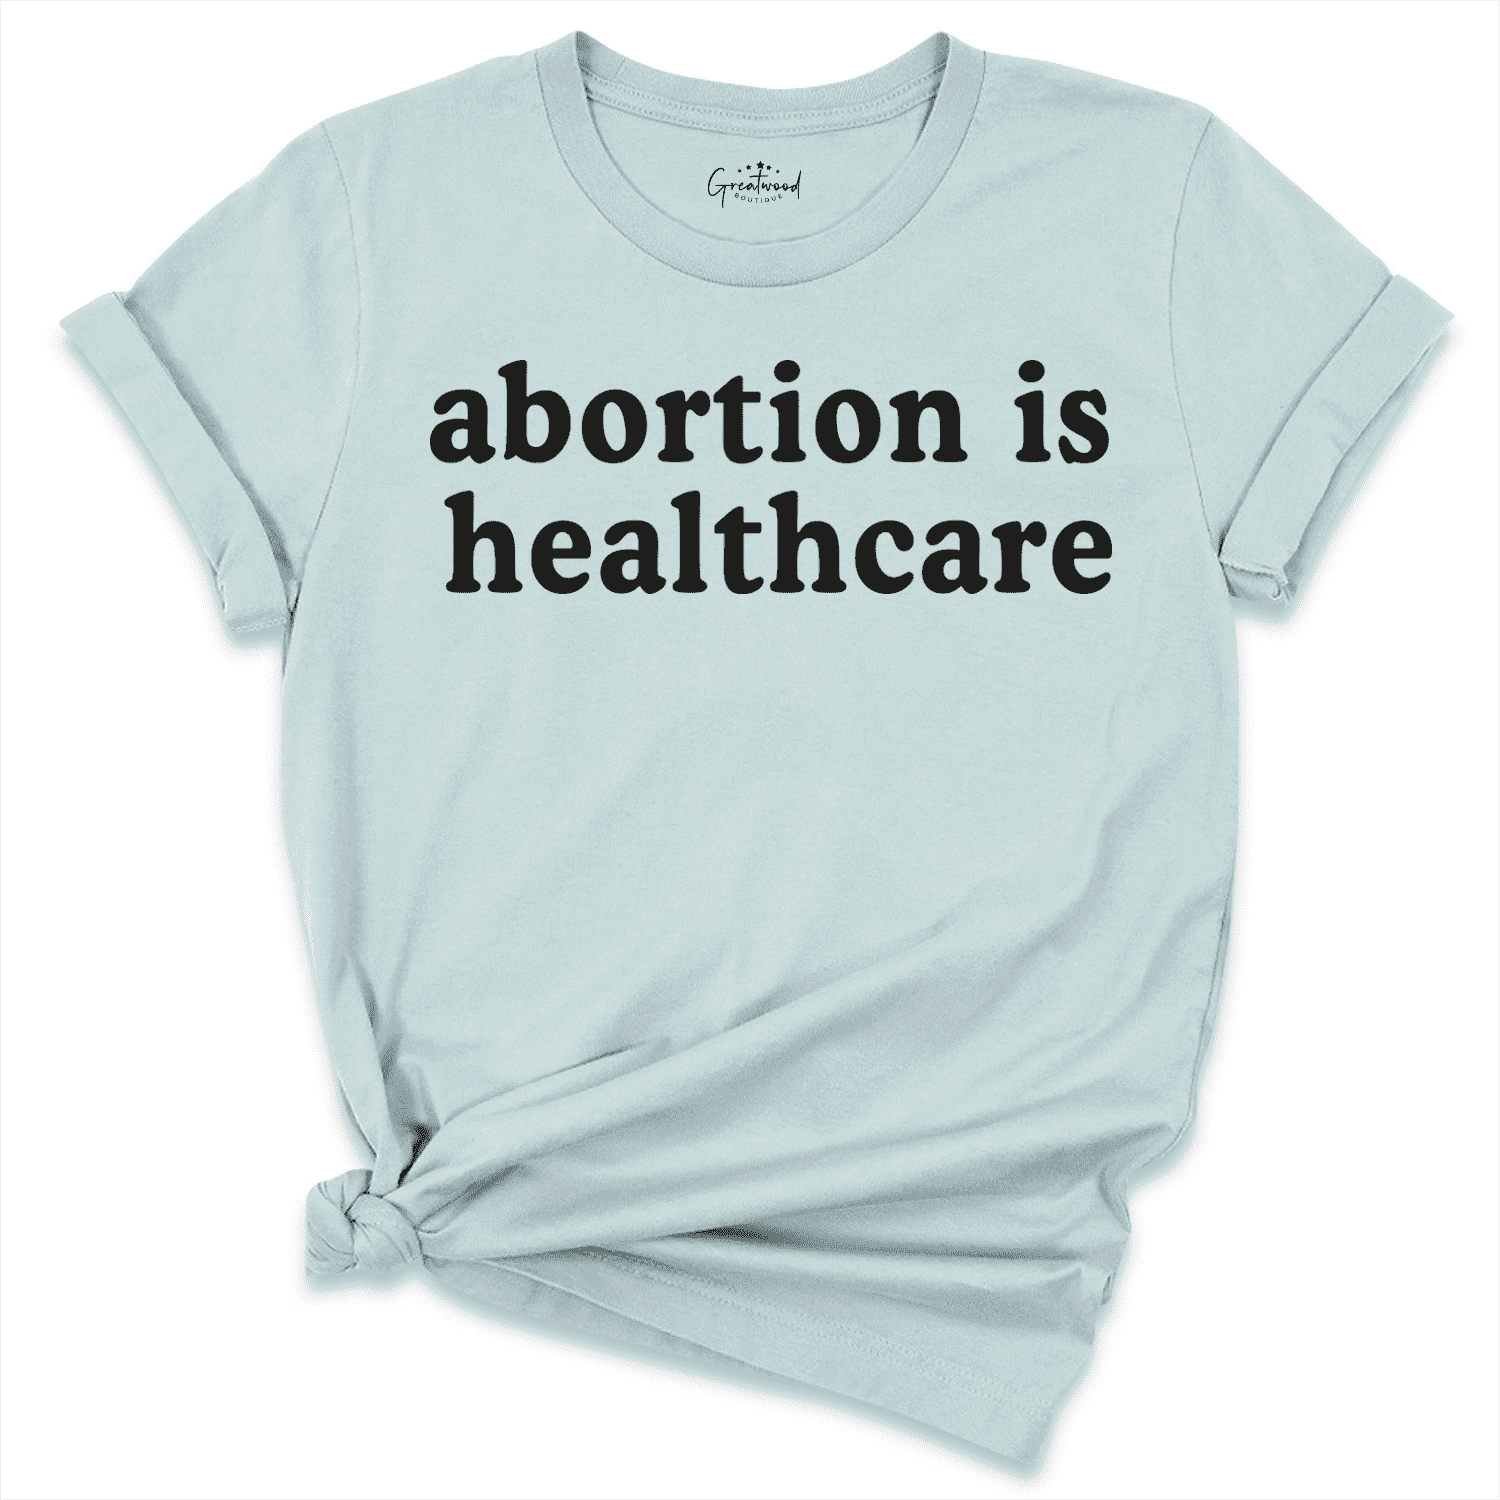 Abortion is Healthcare Shirt Blue - Greatwood Boutique